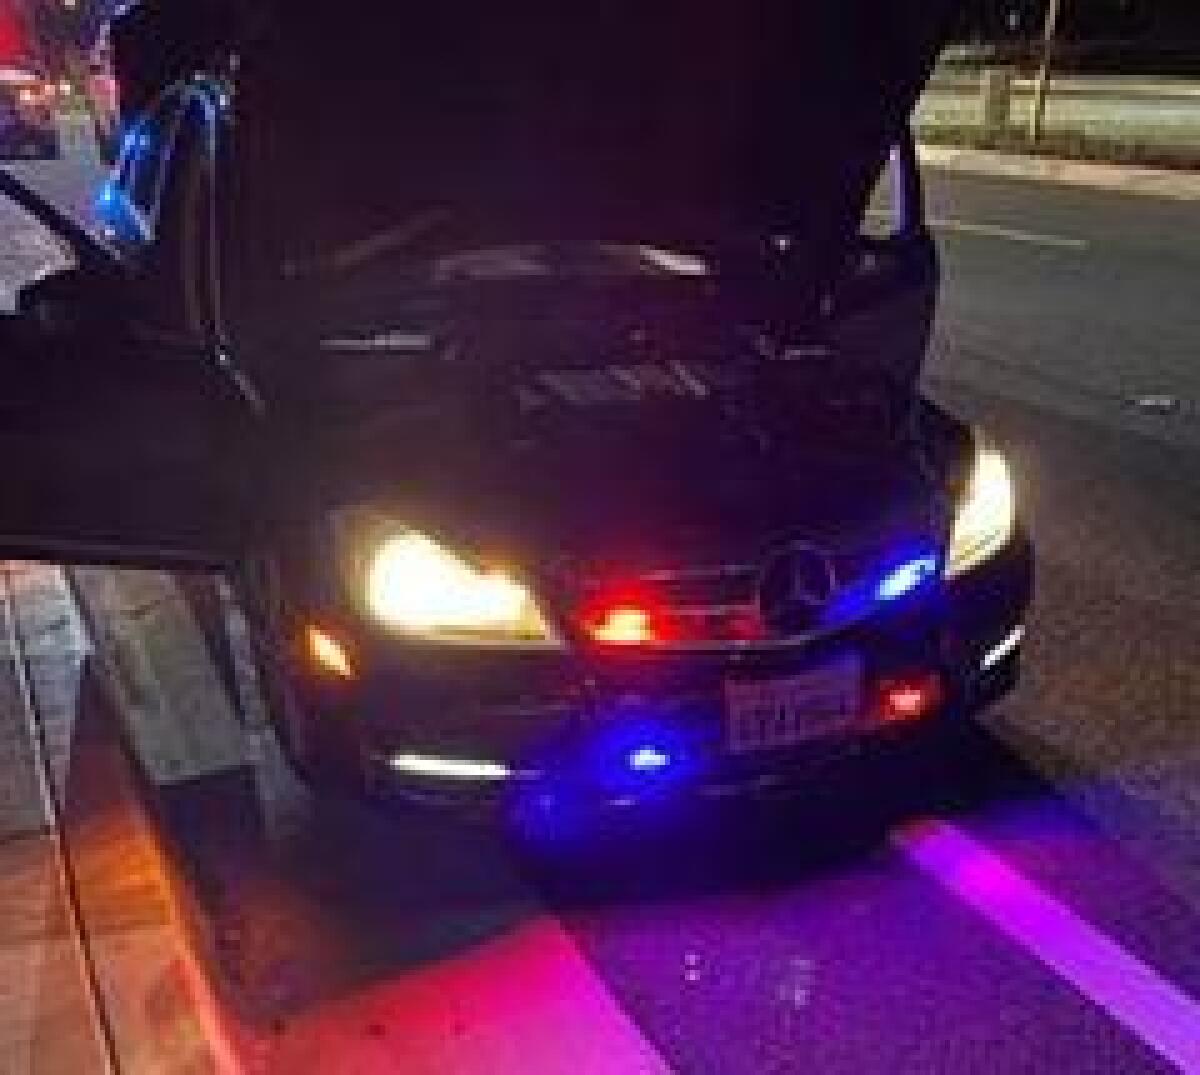 Franklin Lopez Alas, 23, was arrested Tuesday on suspicion of impersonating a police officer after authorities say he passed a detective on the freeway while flashing red-and-blue lights on his Mercedes-Benz.